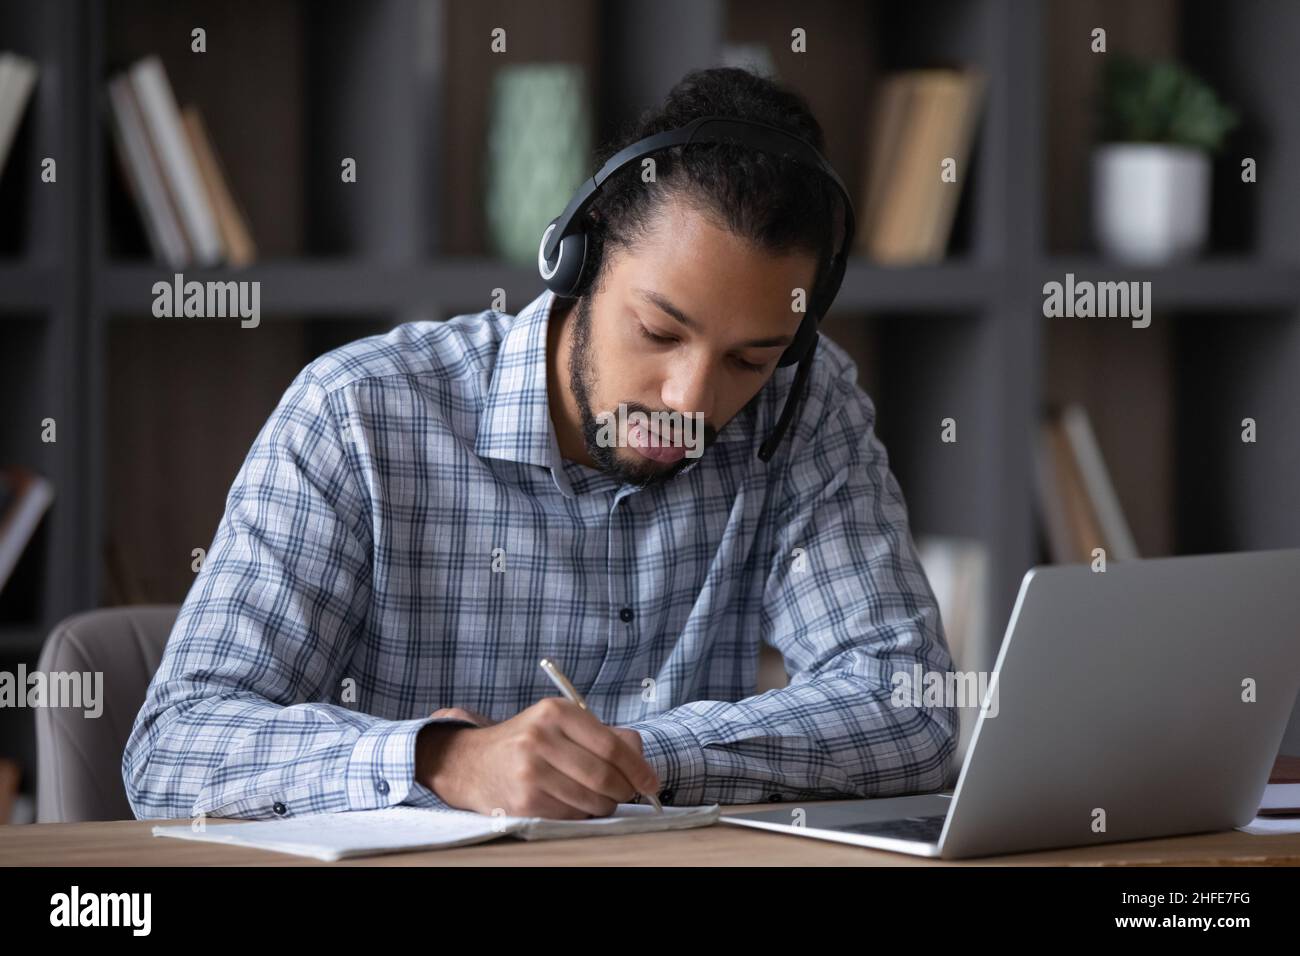 Focused student guy in headphones with mic writing notes Stock Photo